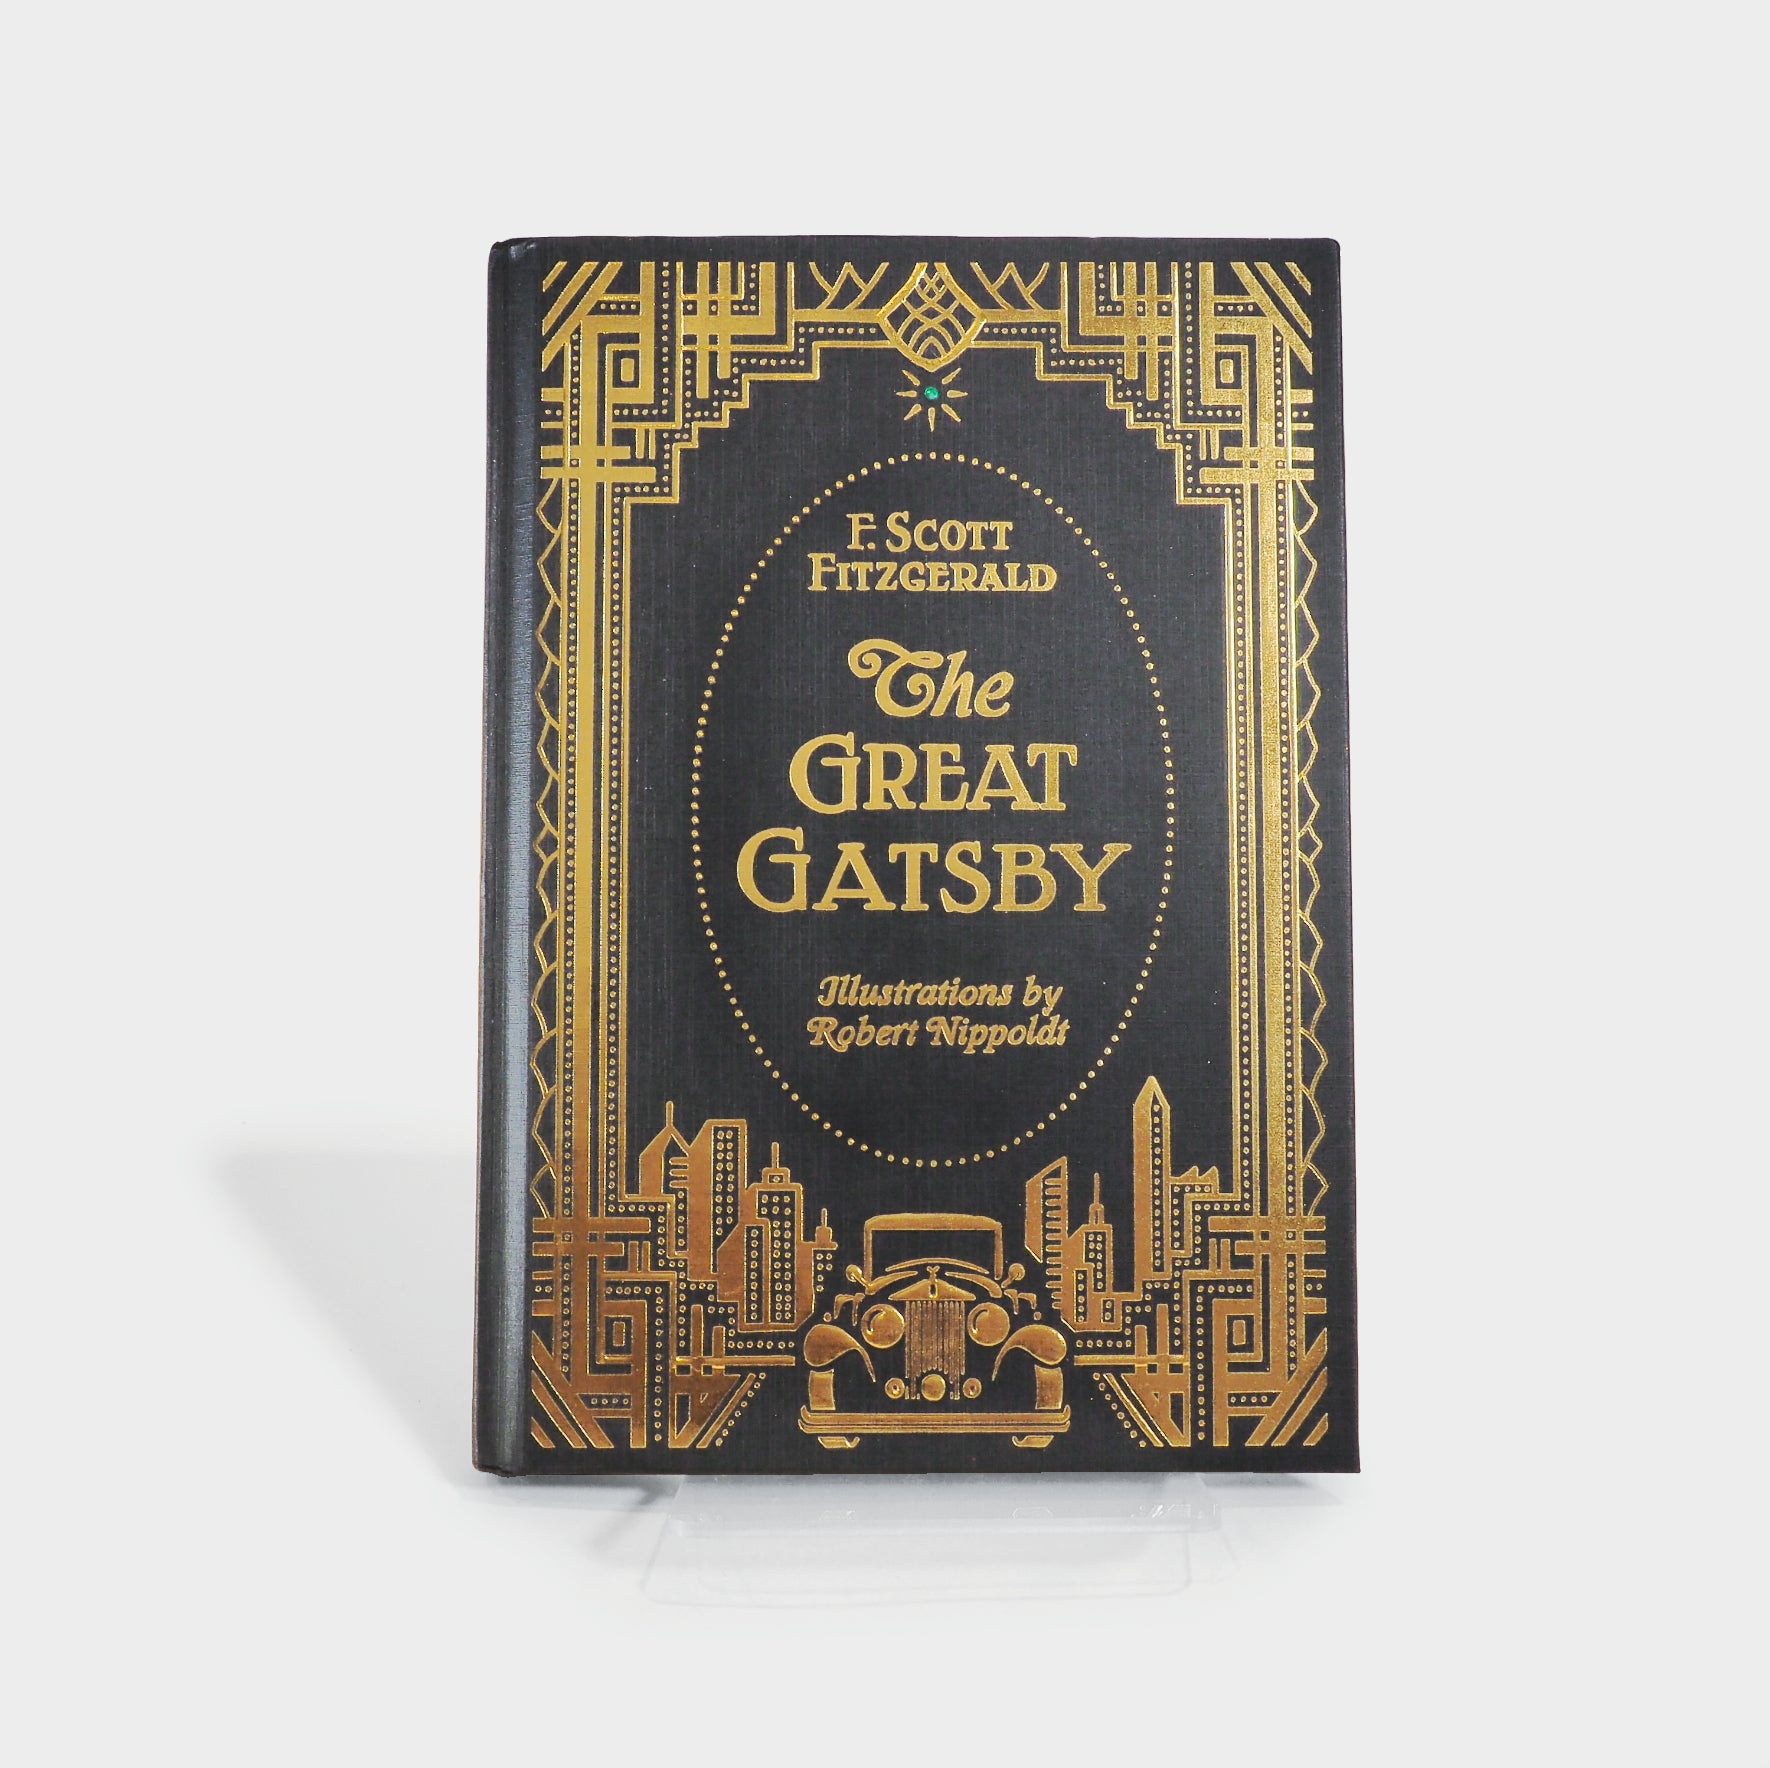 Library　Gatsby　–　The　Store　Great　The